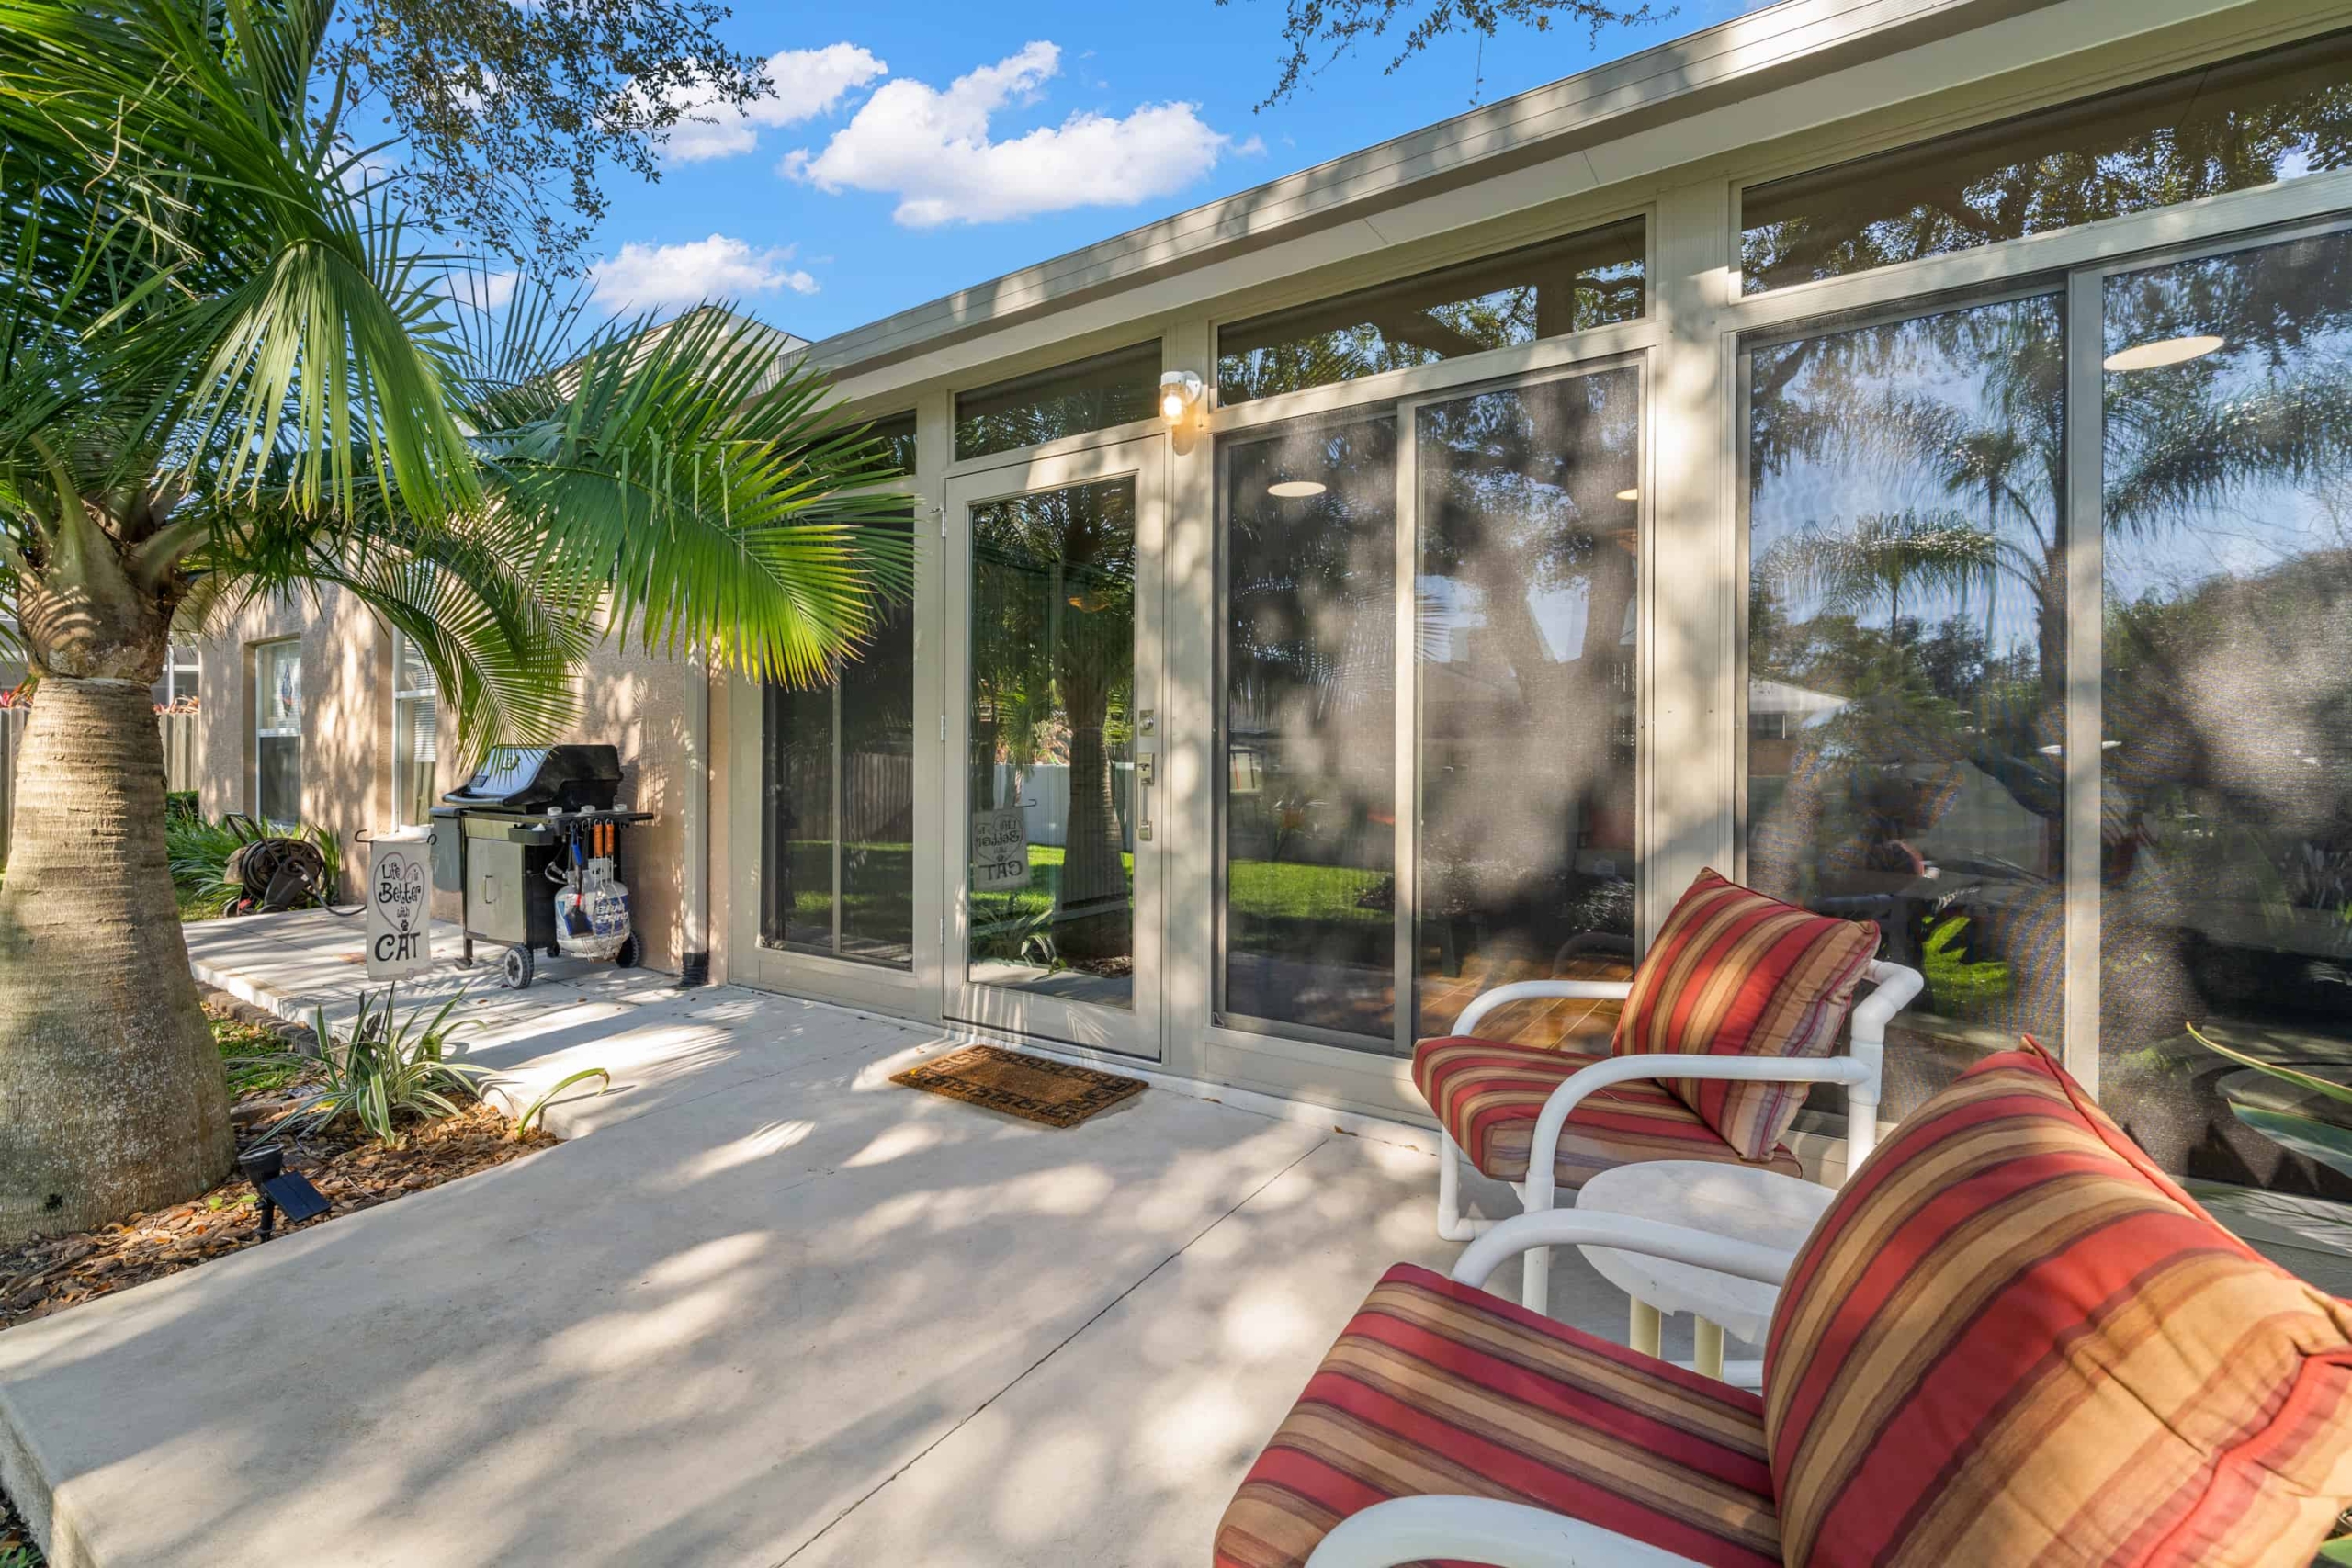 Landscaping for natural cooling of Florida sunroom